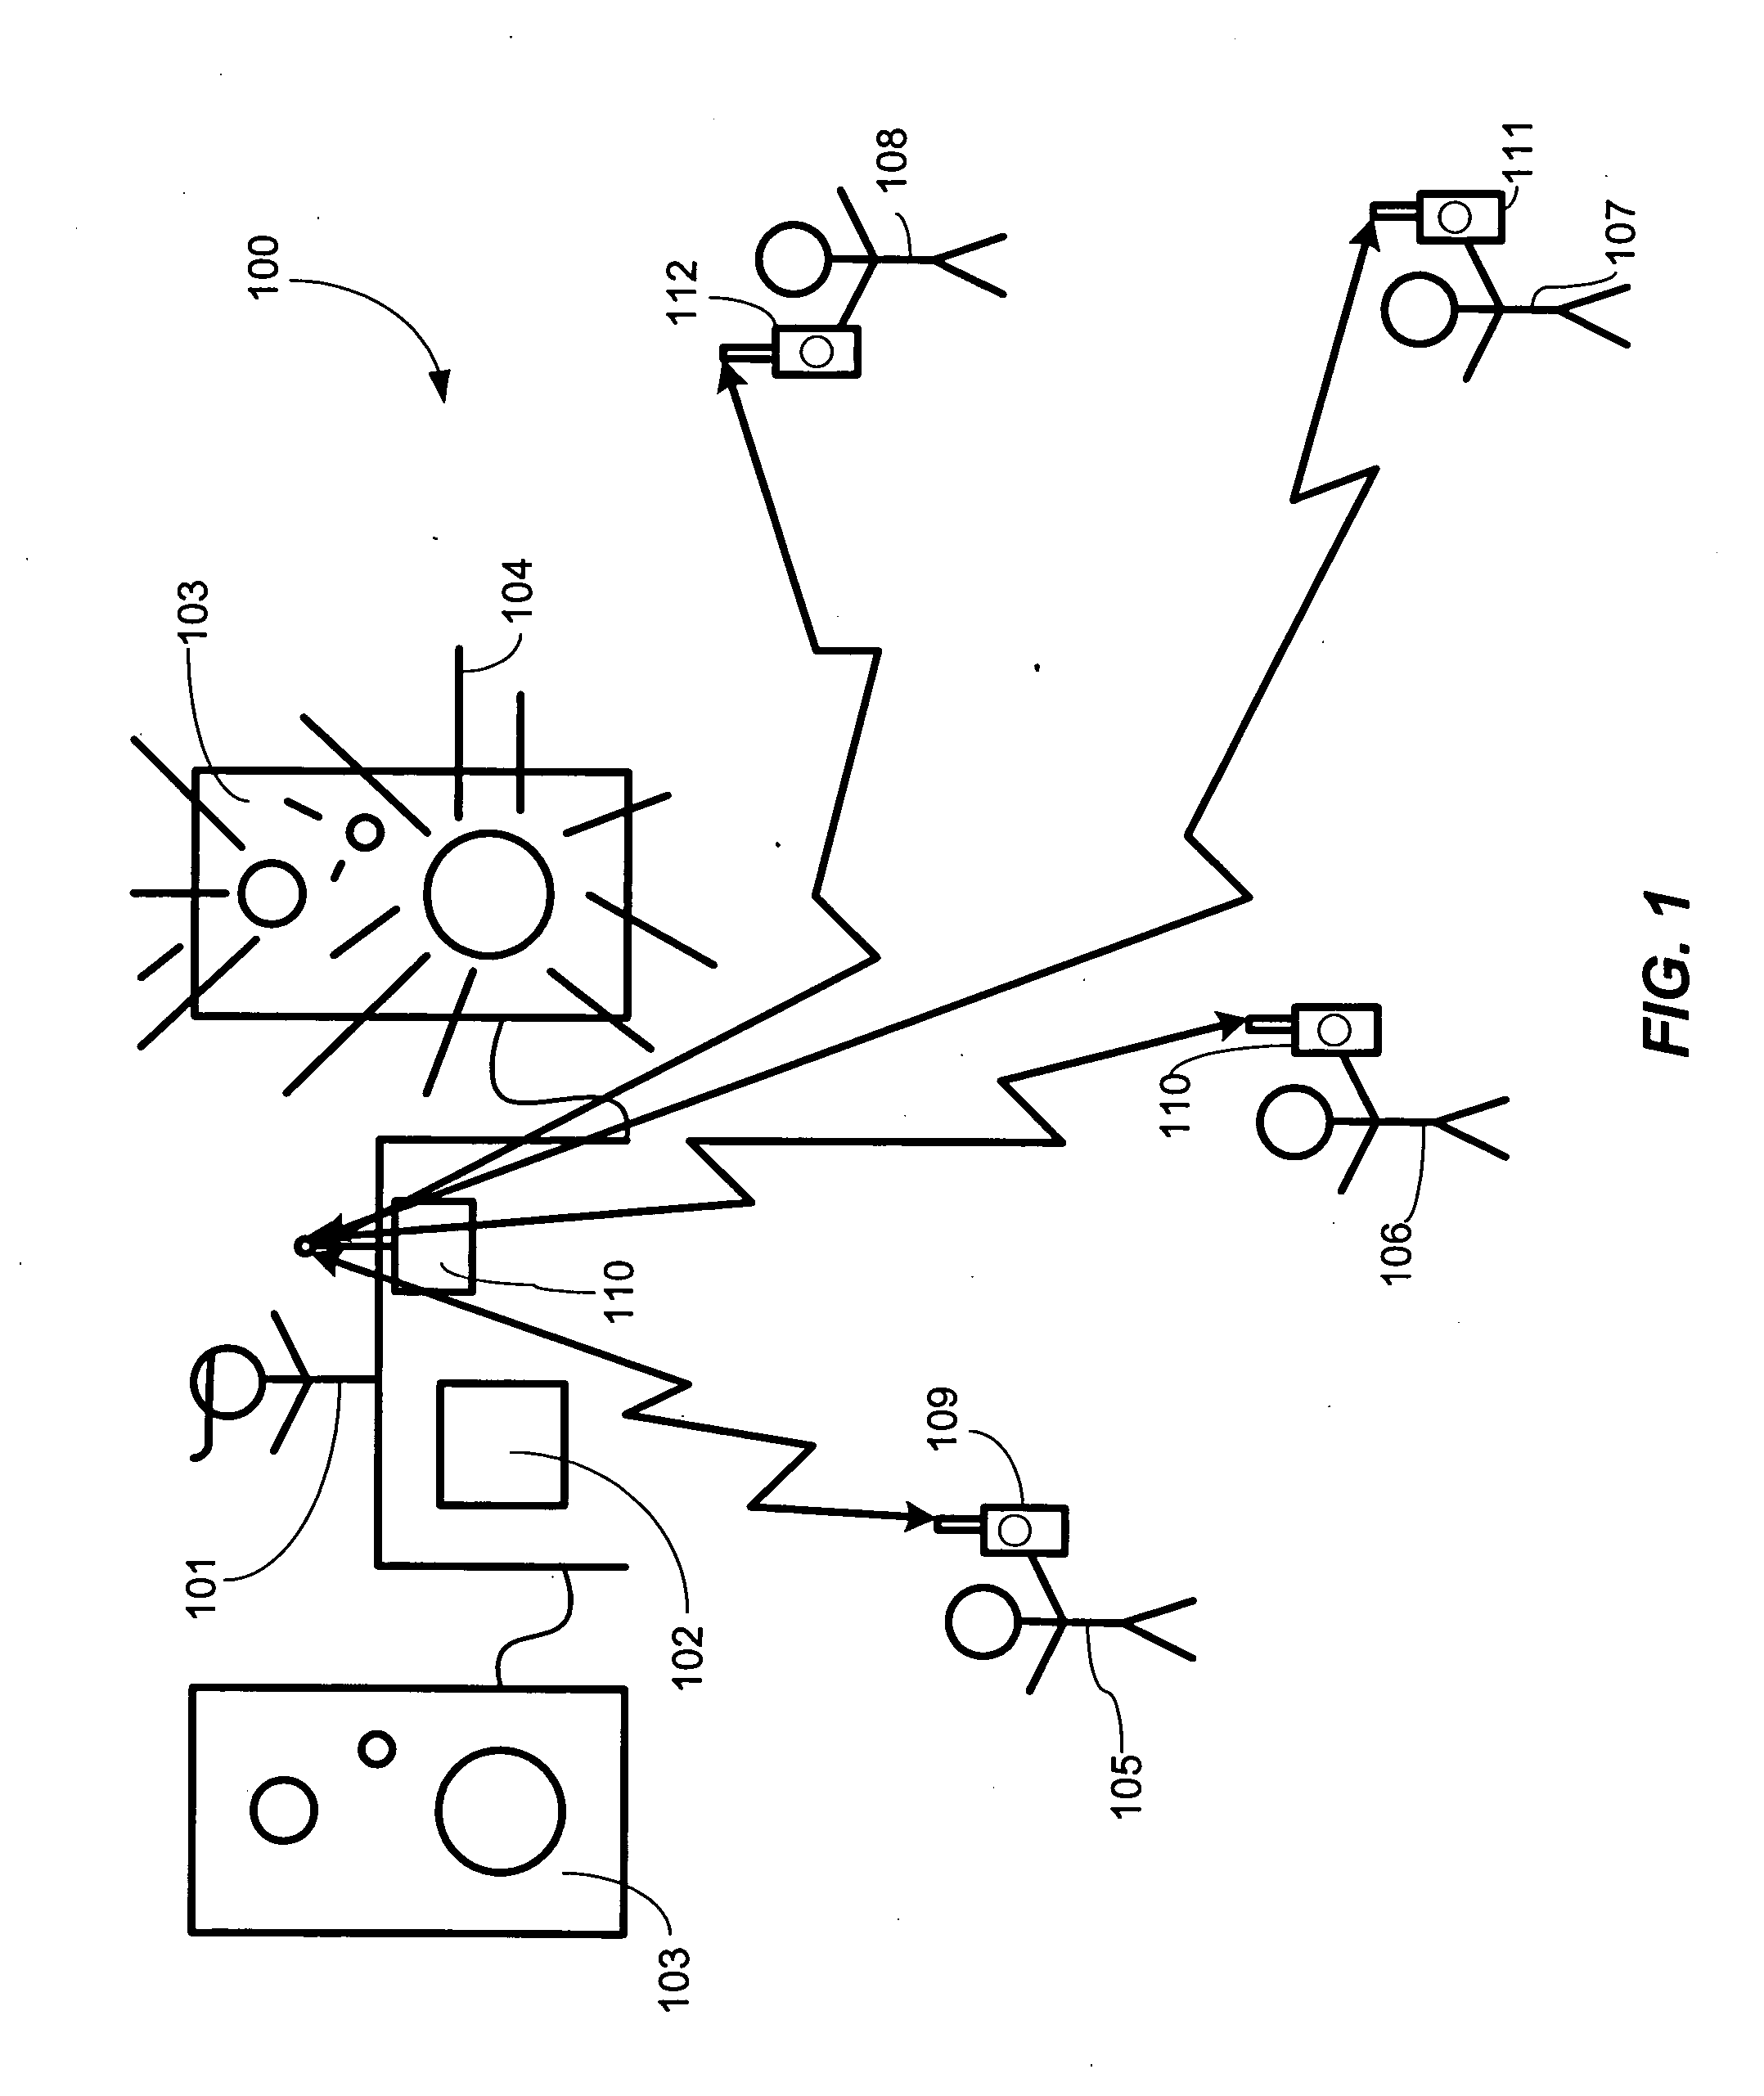 Local area preference determination system and method